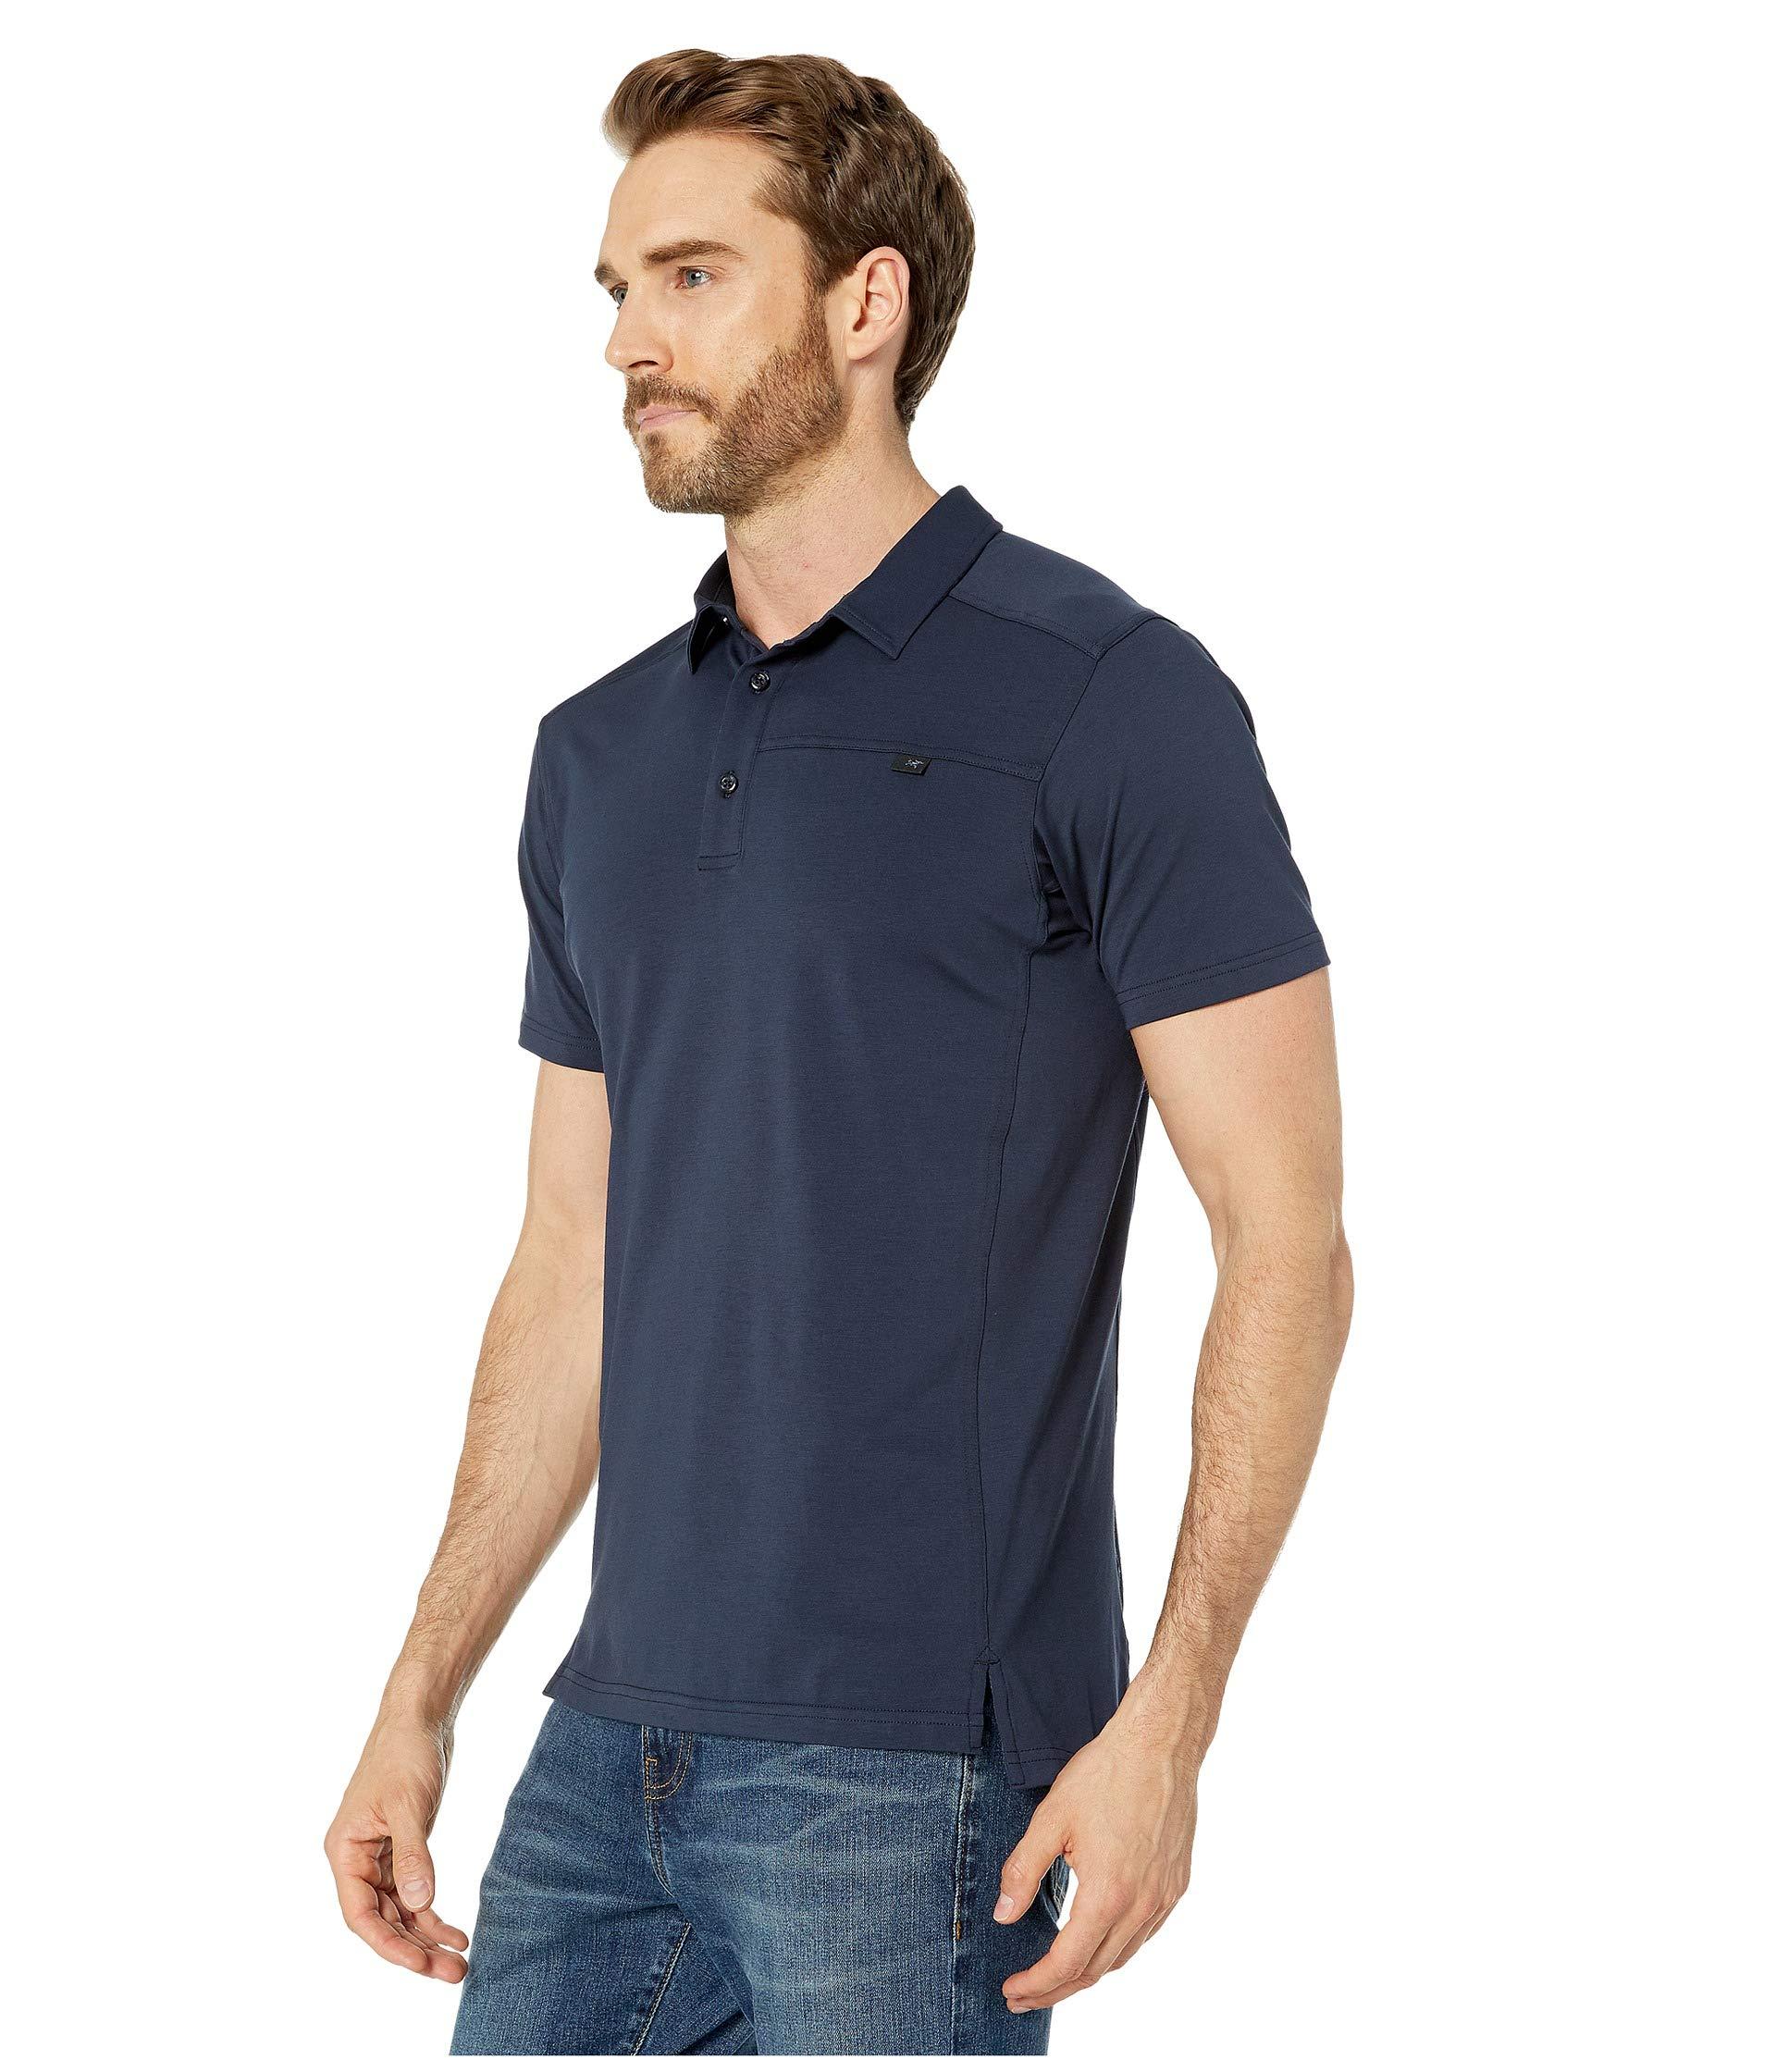 Arc'teryx Cotton Captive Polo S/s in Navy (Blue) for Men - Lyst